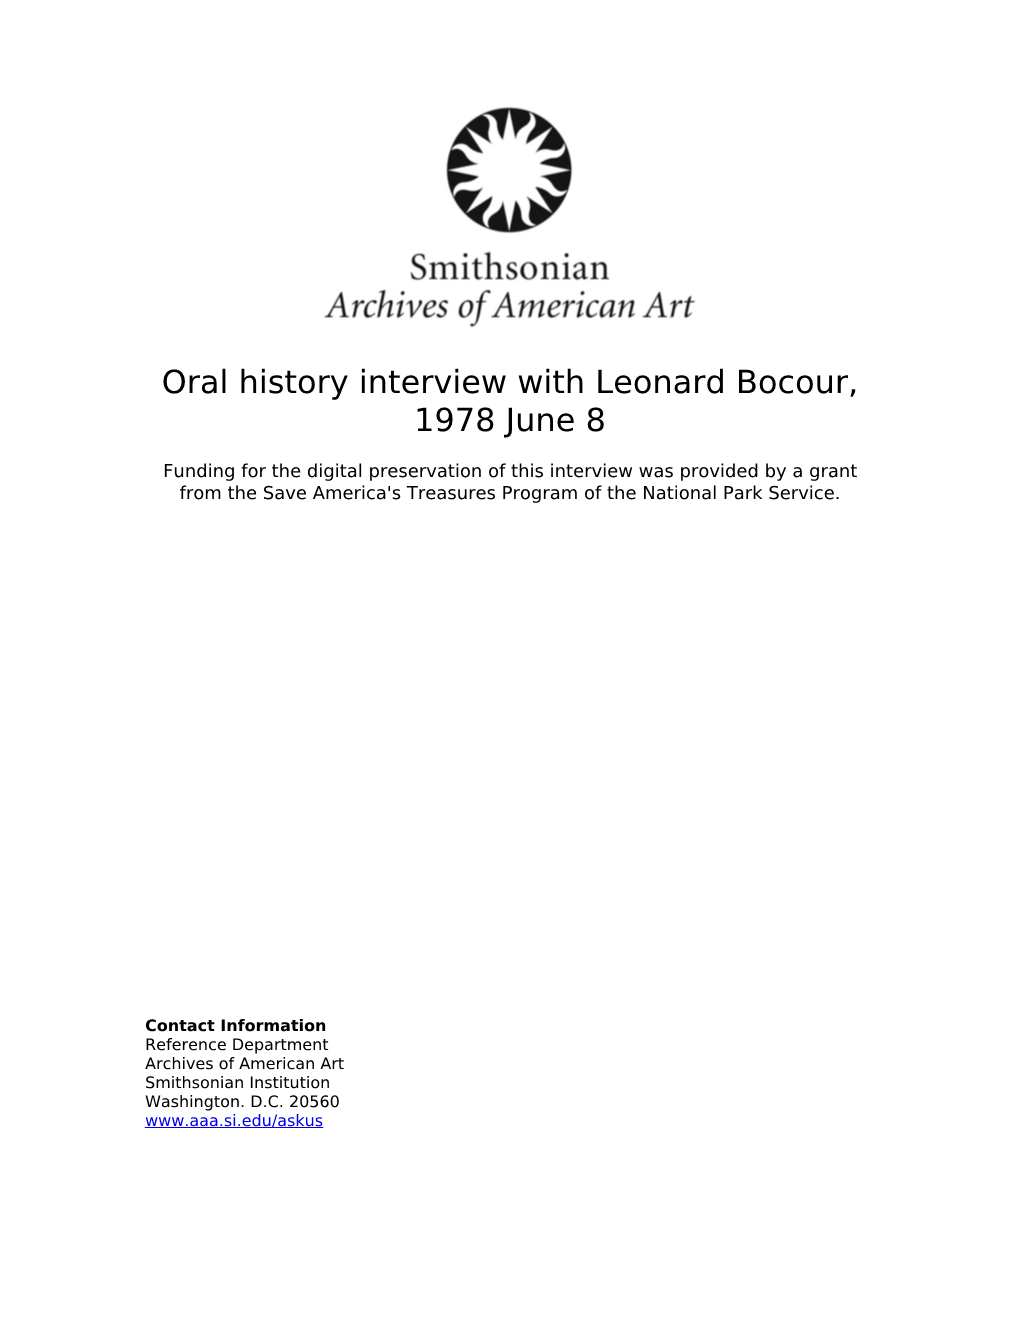 Oral History Interview with Leonard Bocour, 1978 June 8